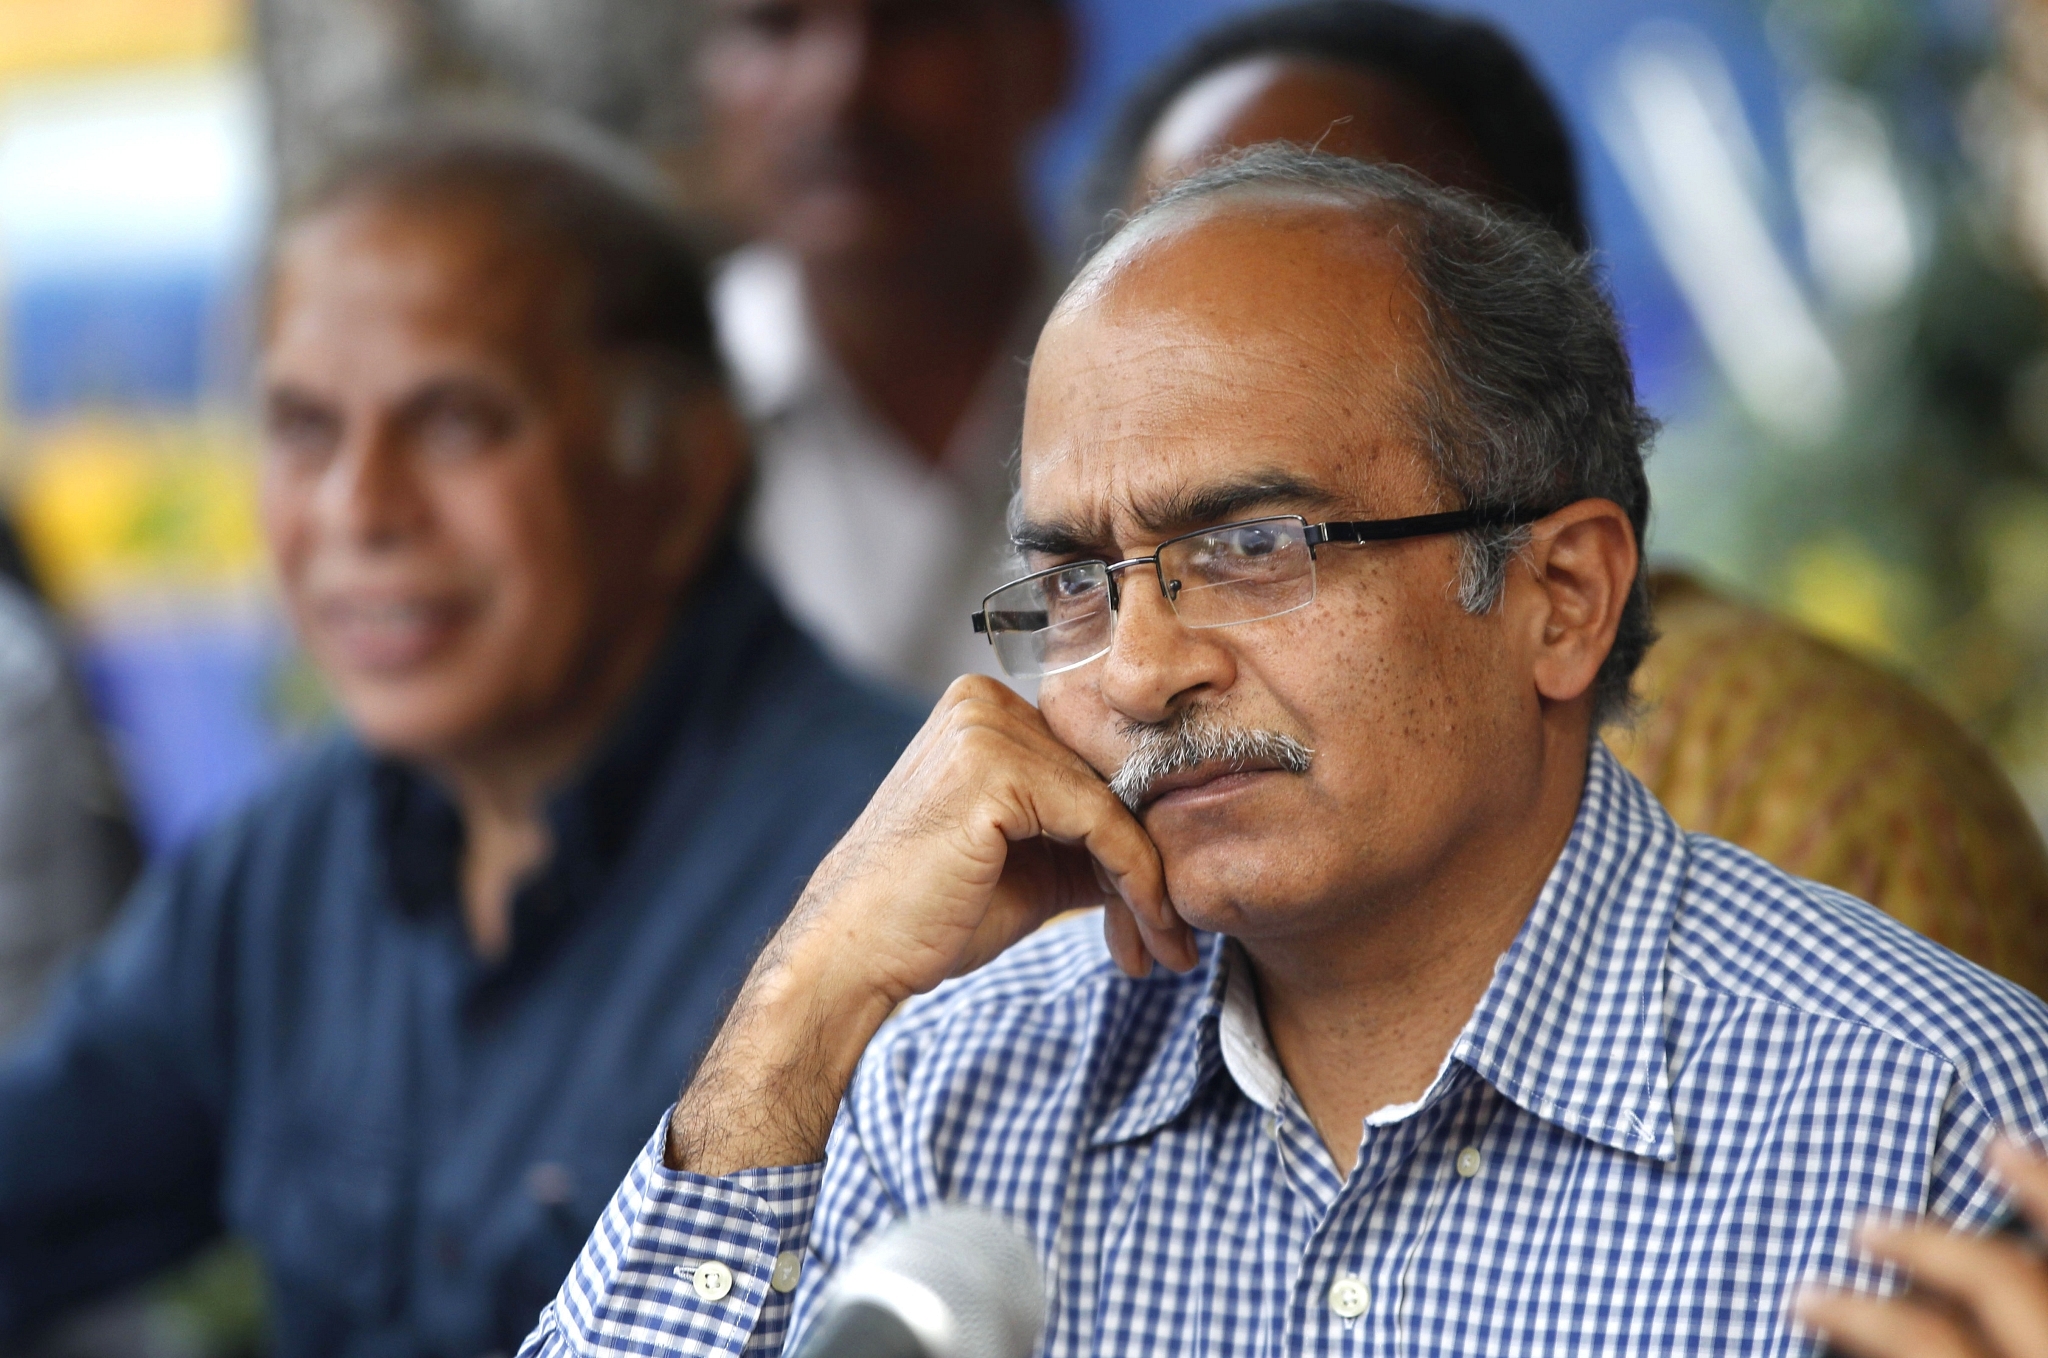 Prashant Bhushan during a press conference at the Press Club of India on 15 April 2015 in New Delhi (Representative image) (Ajay Aggarwal/ Hindustan Times via Getty Images)